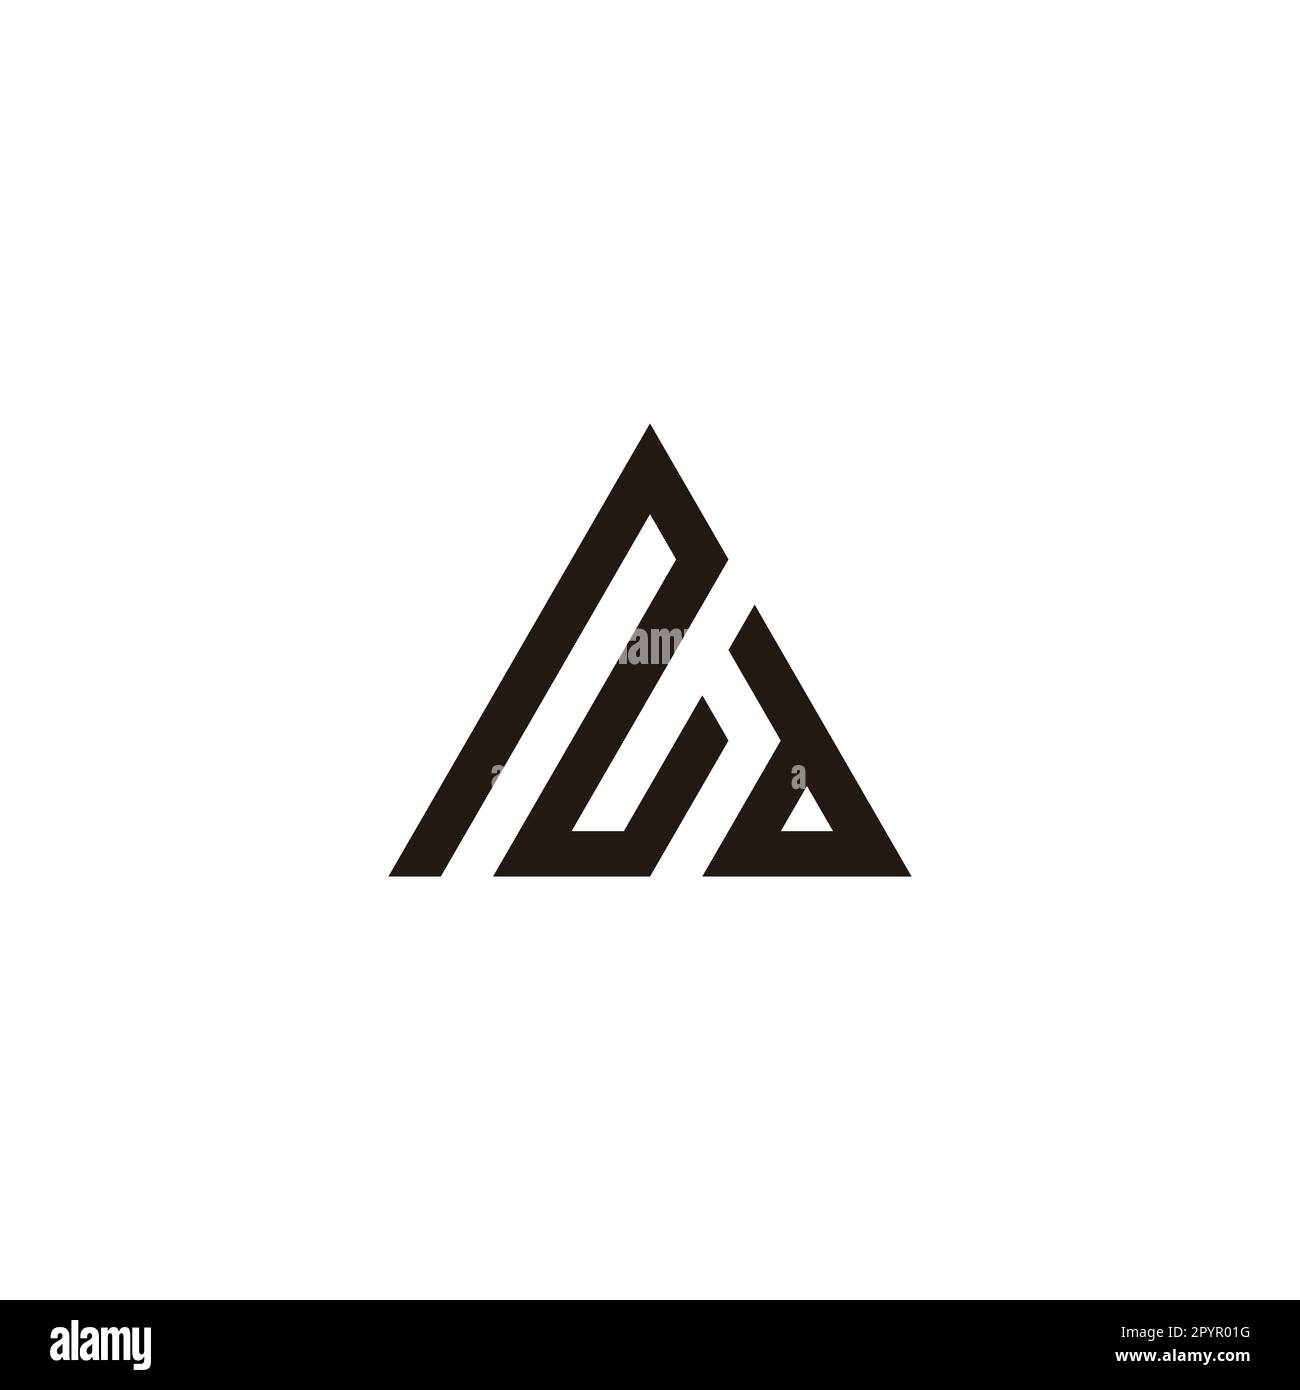 Letter Nd triangle, building geometric symbol simple logo vector Stock ...